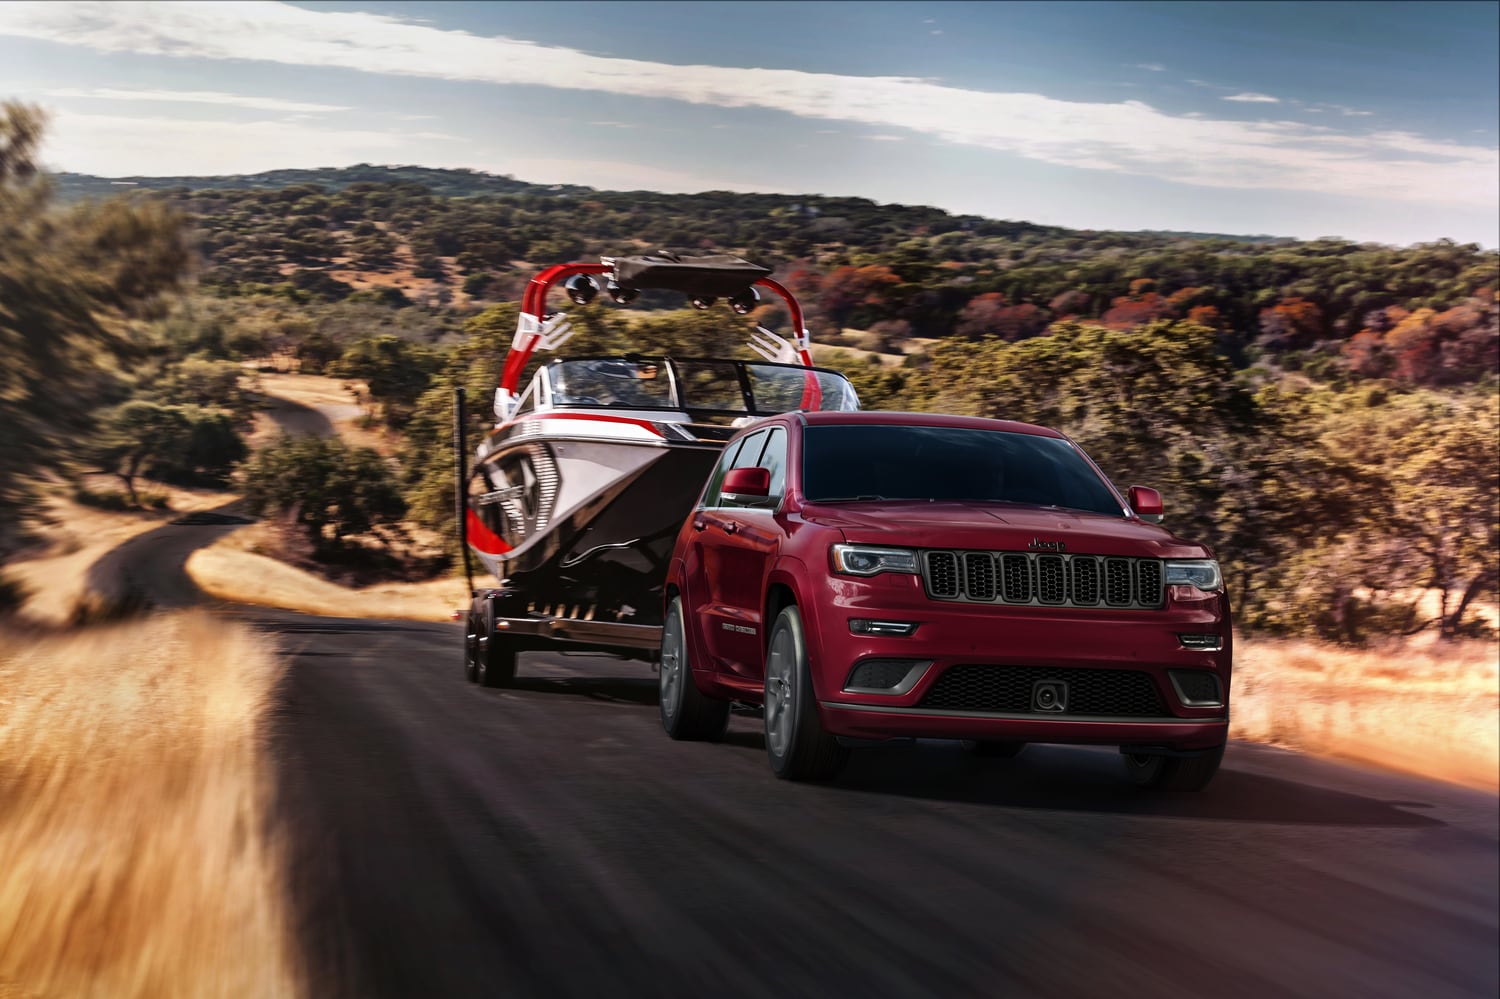 dark red Jeep Grand Cherokee SUV towing a boat